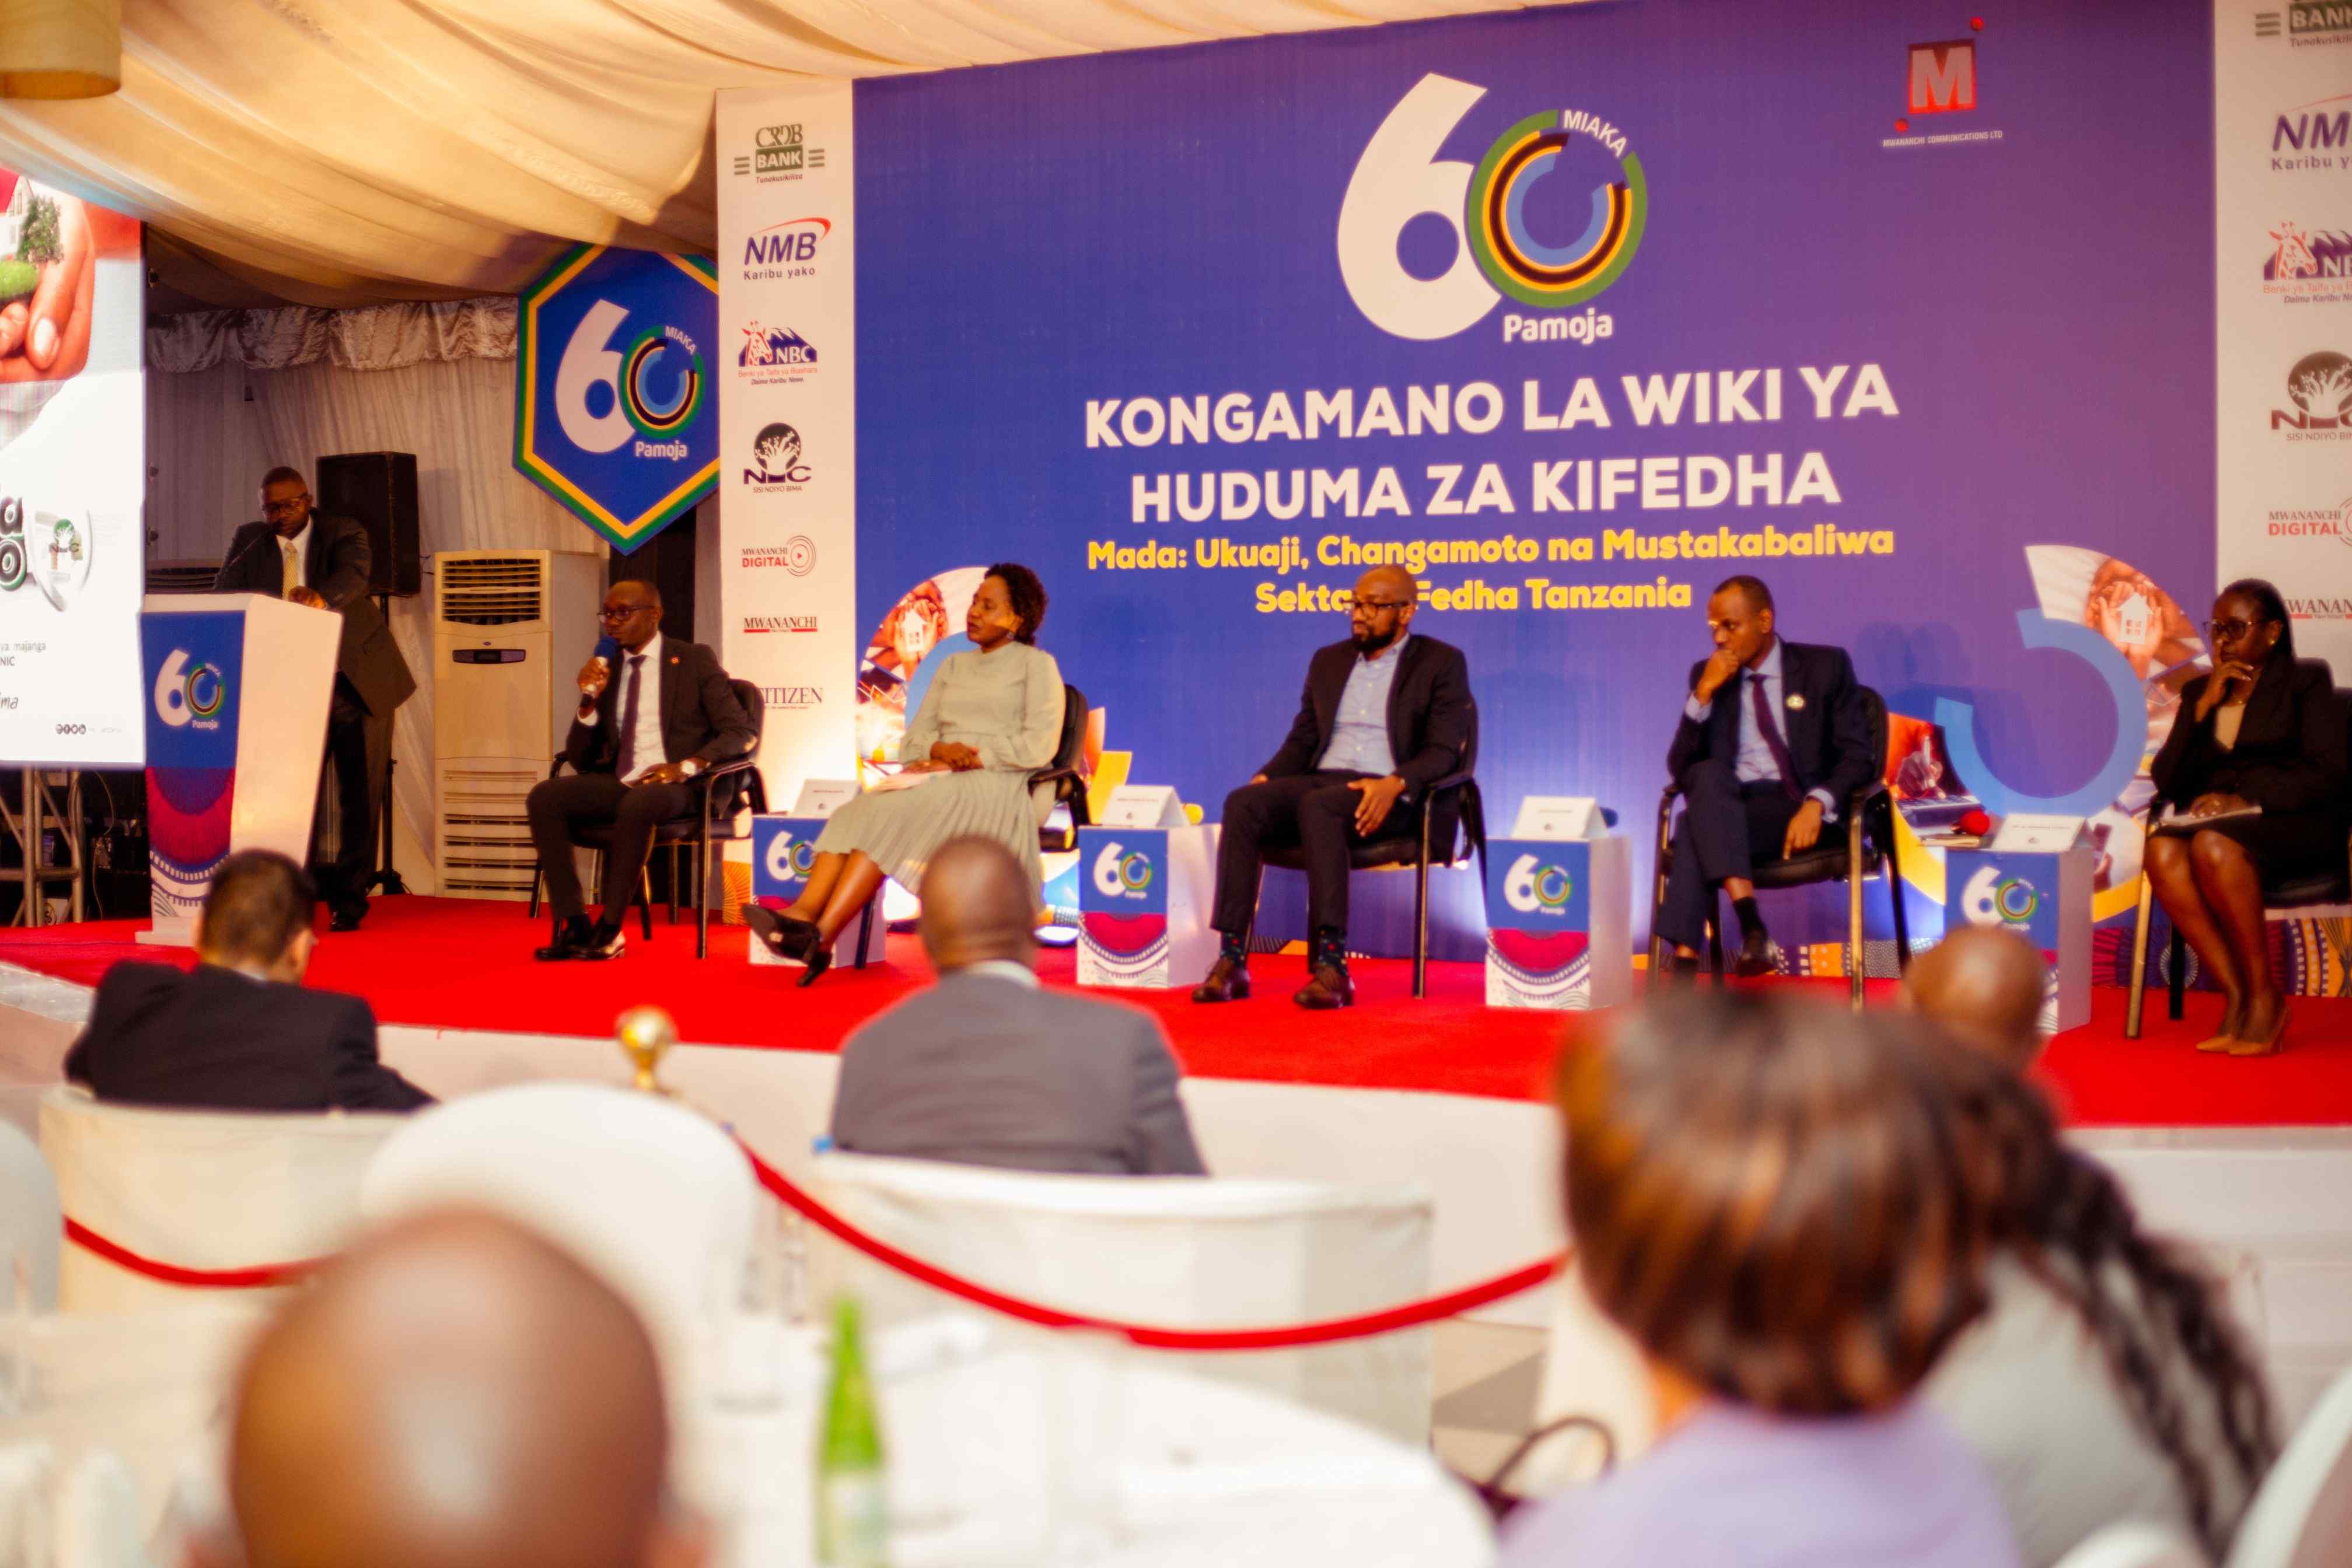 Mwananchi Communications Limited united the world to celebrate Tanzania’s 60 years of Independence.